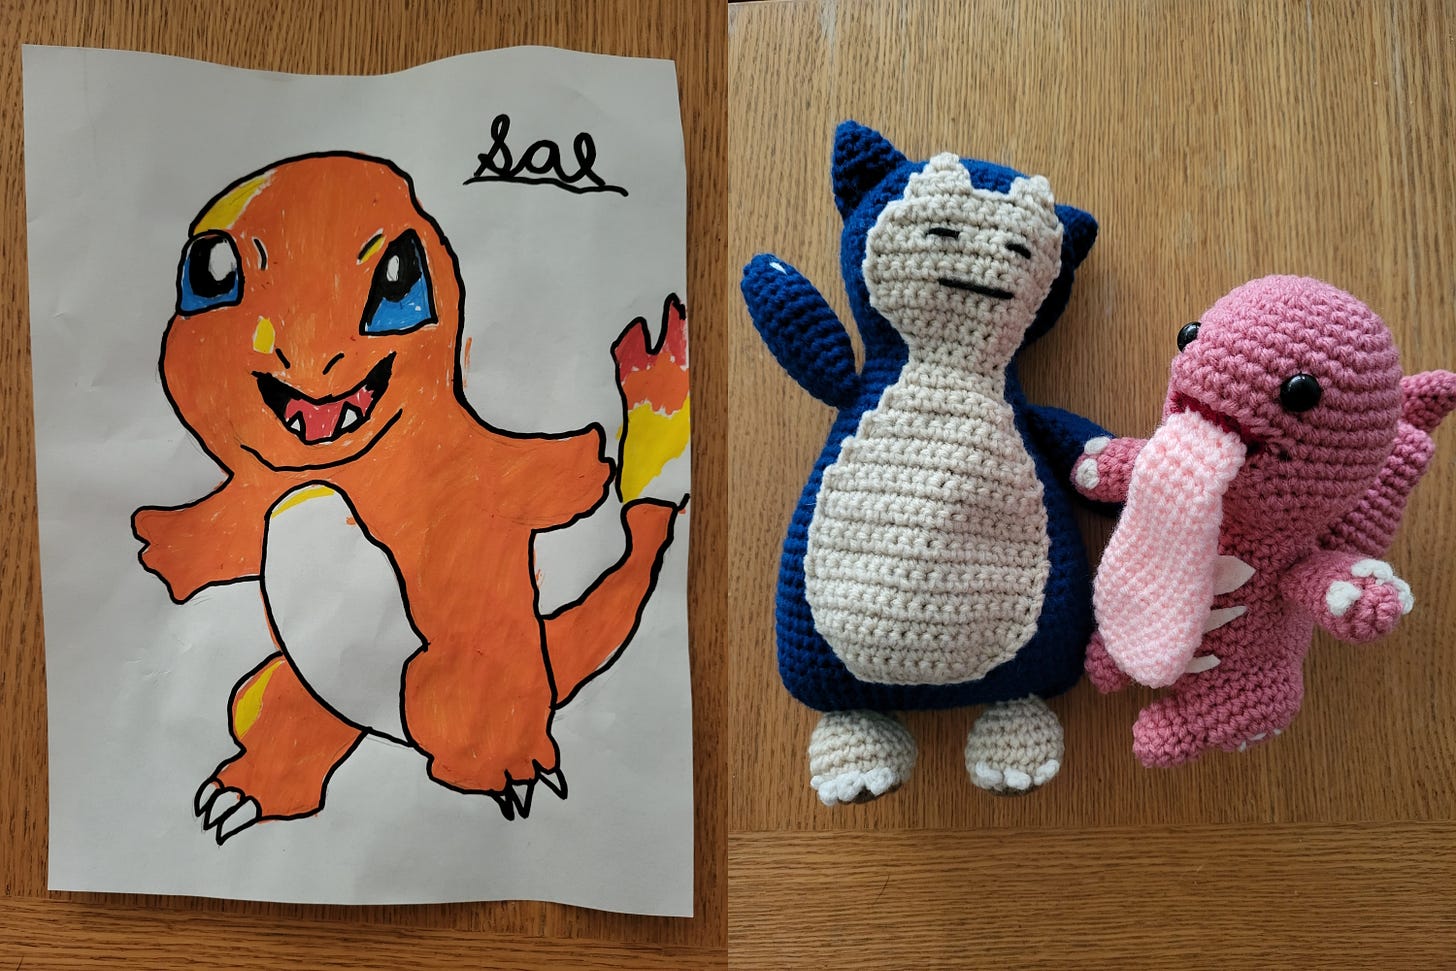 Fans from various conventions sometimes give Mike gifts based on Pokémon he has voiced. Pictured are some artwork of Charmander, and a crochet Snorlax and Lickitung